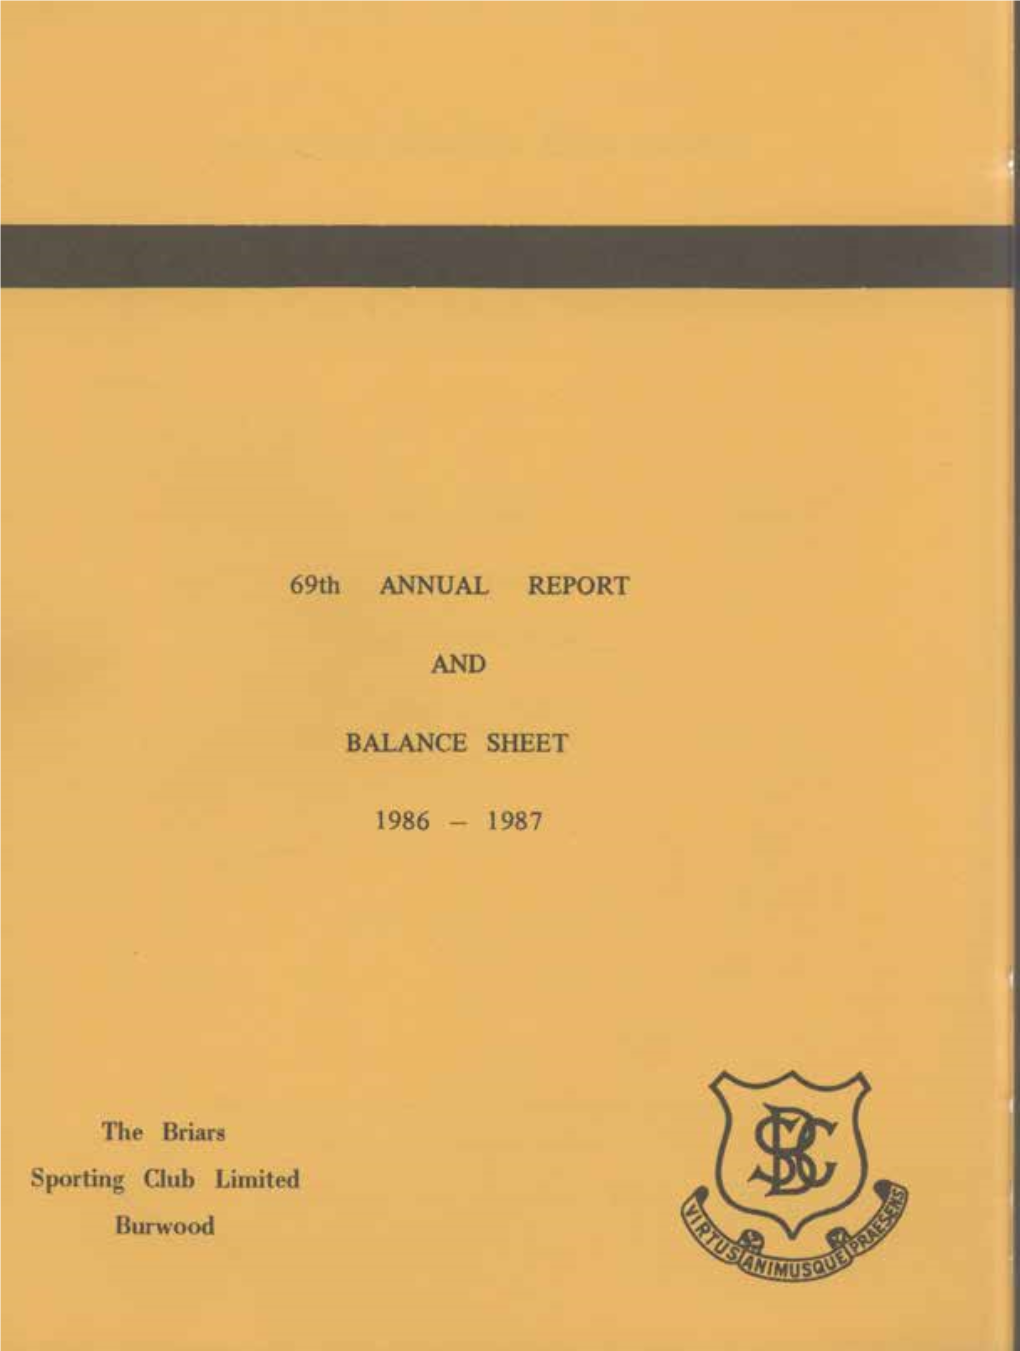 The Briars Sporting Club Limited Annual Reports 1986-87